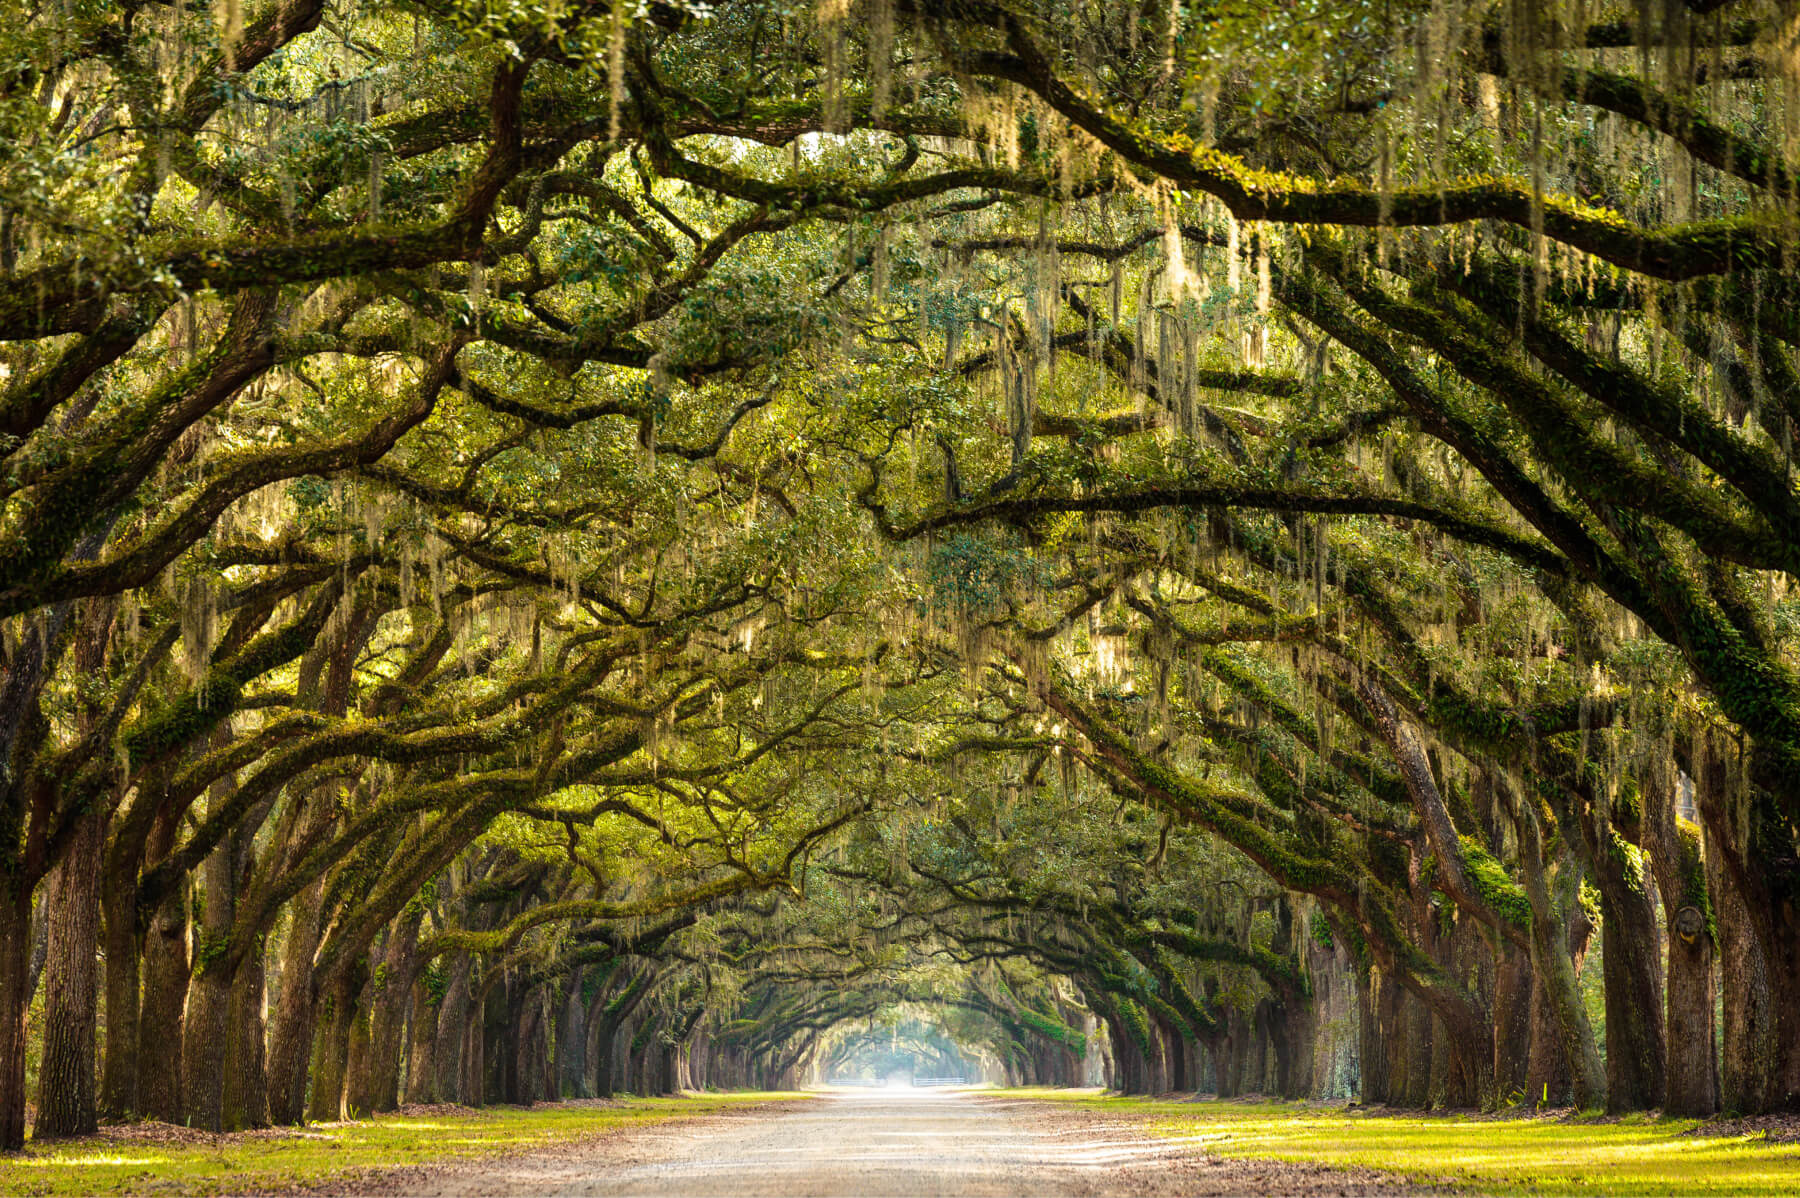 Large, moss-covered trees forming a natural archway over a dirt road